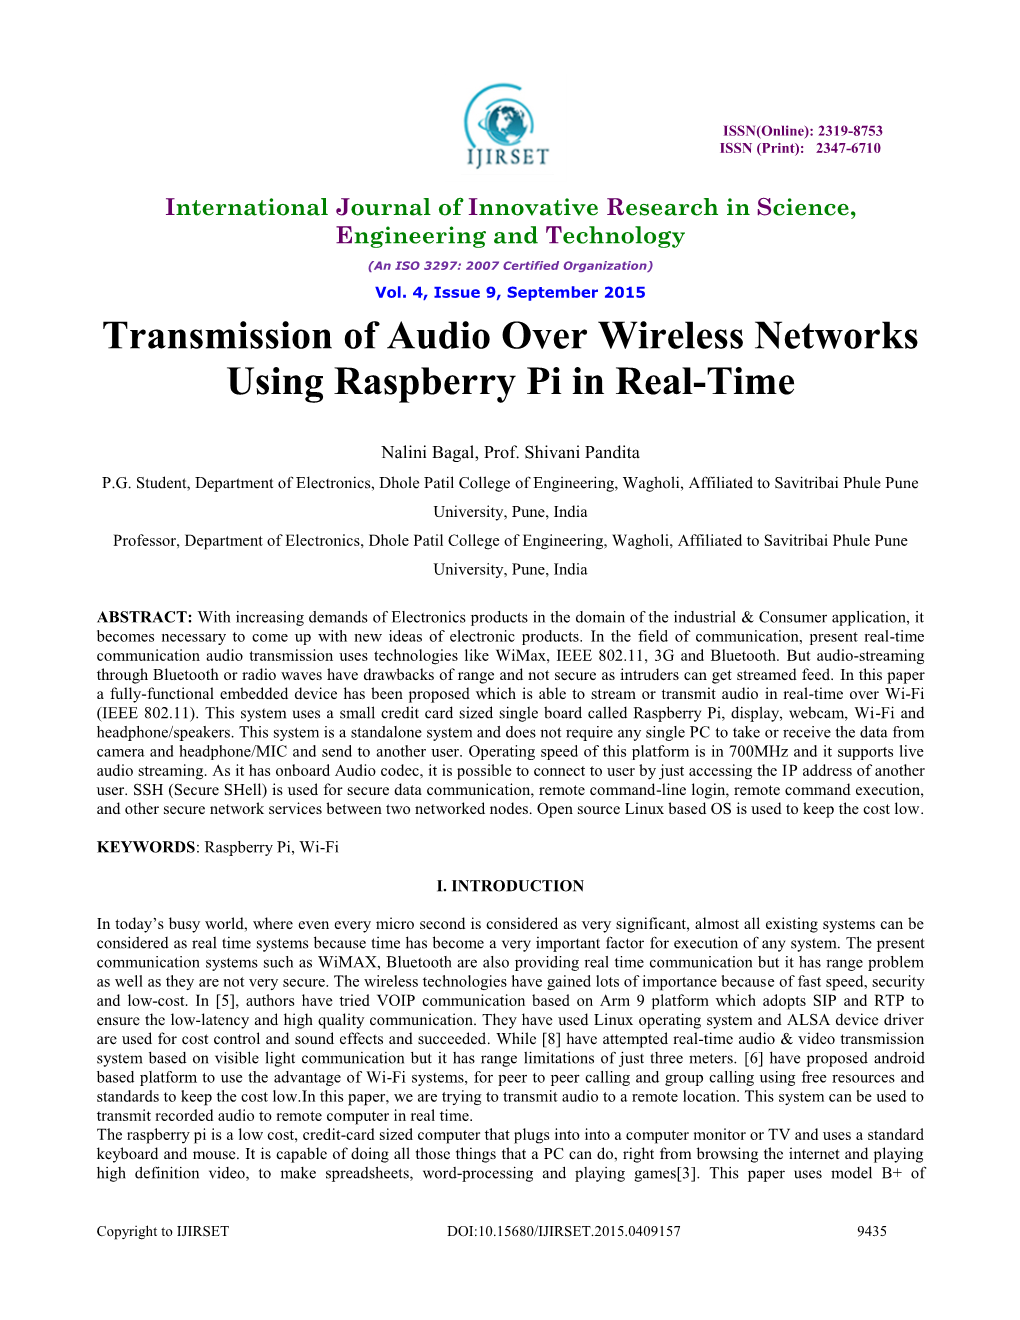 Transmission of Audio Over Wireless Networks Using Raspberry Pi in Real-Time